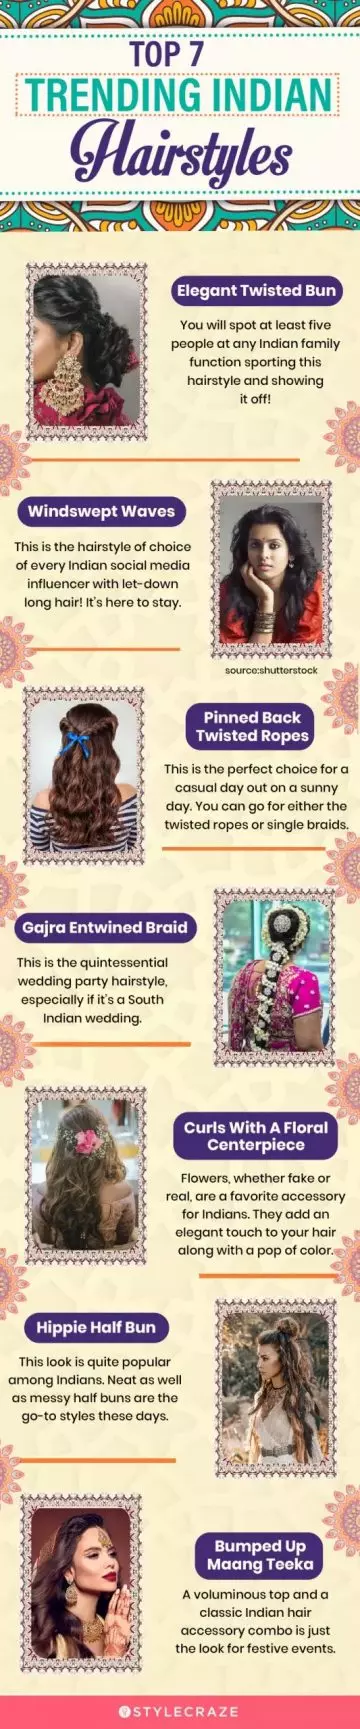 top 10 trending indian hairstyles (infographic)